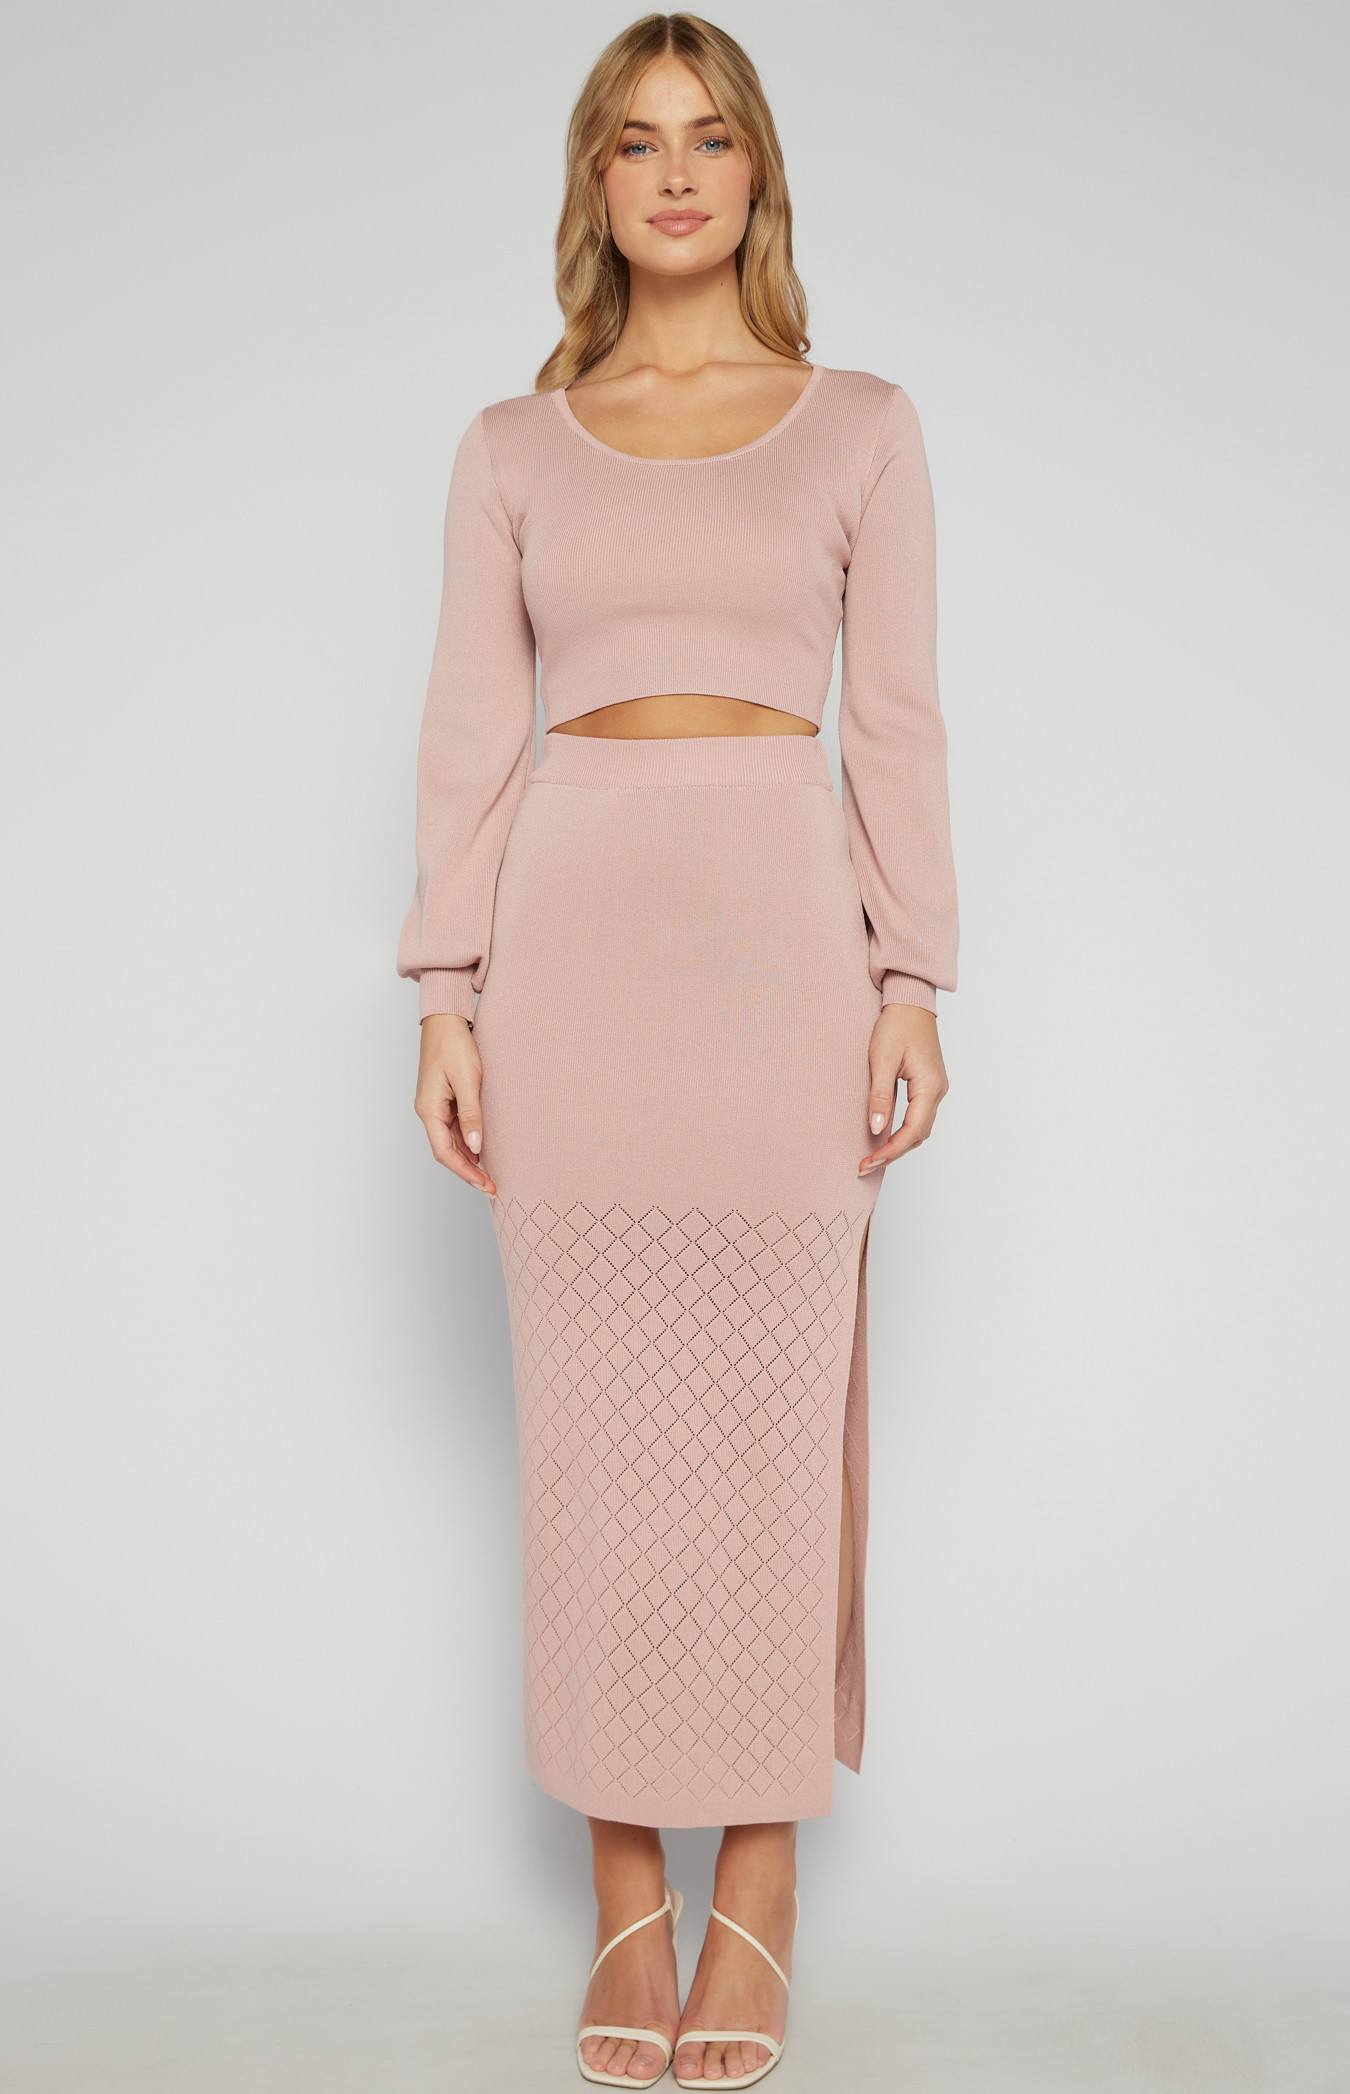 Contrast Textured Hem Knit Set with Top and Maxi Skirt (SKN832)